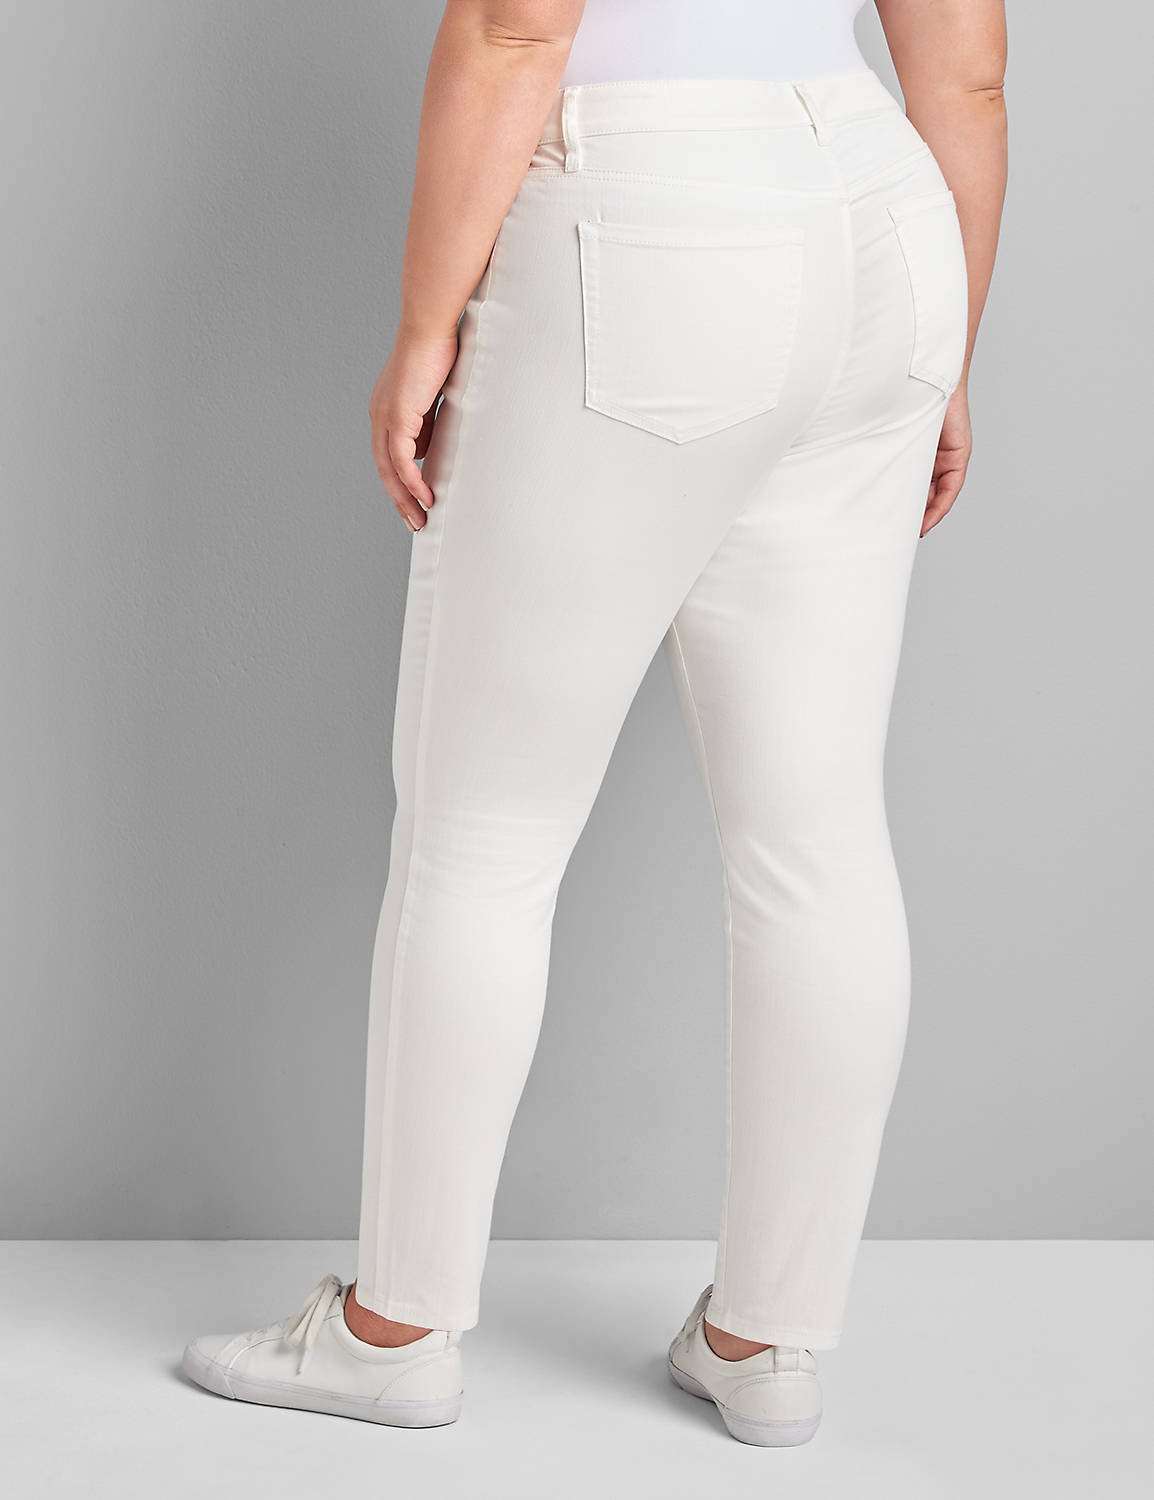 Signature Fit Skinny Jean- White Product Image 2